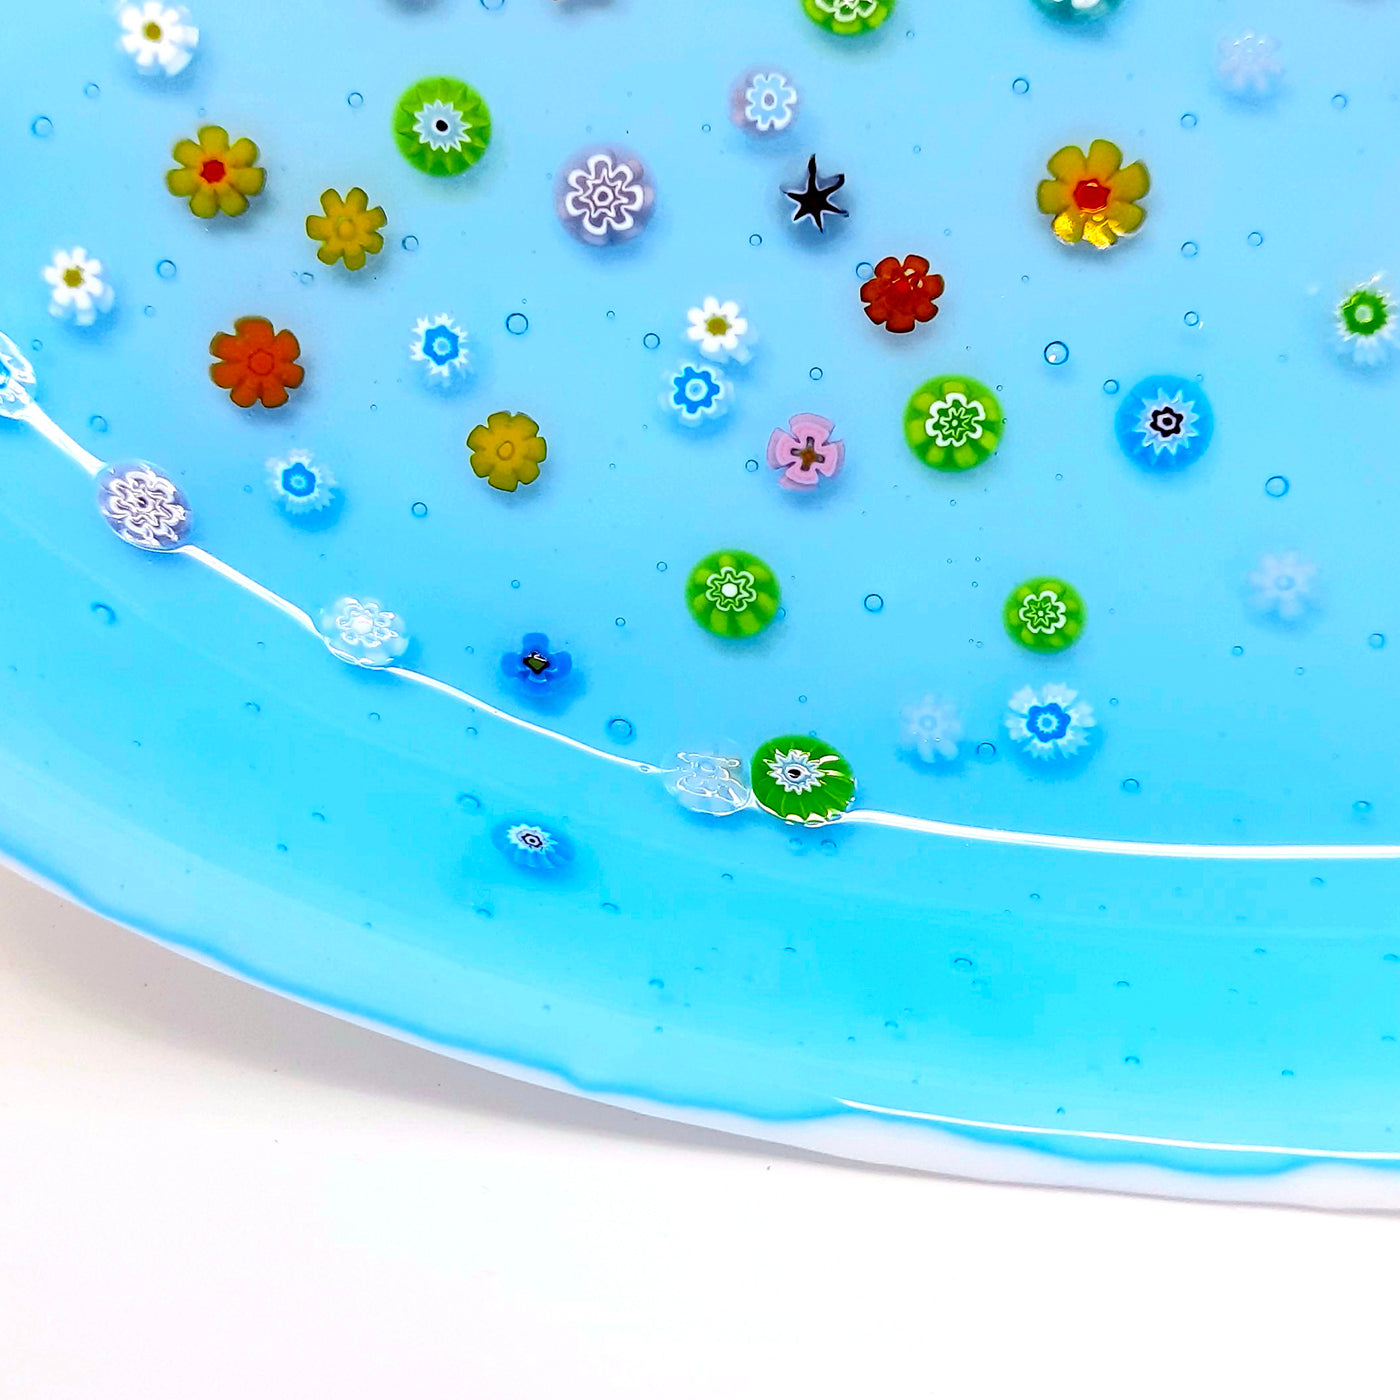 Turquoise Glass Serving Platter with Floral Murrini Inlays  - Alternative view 2